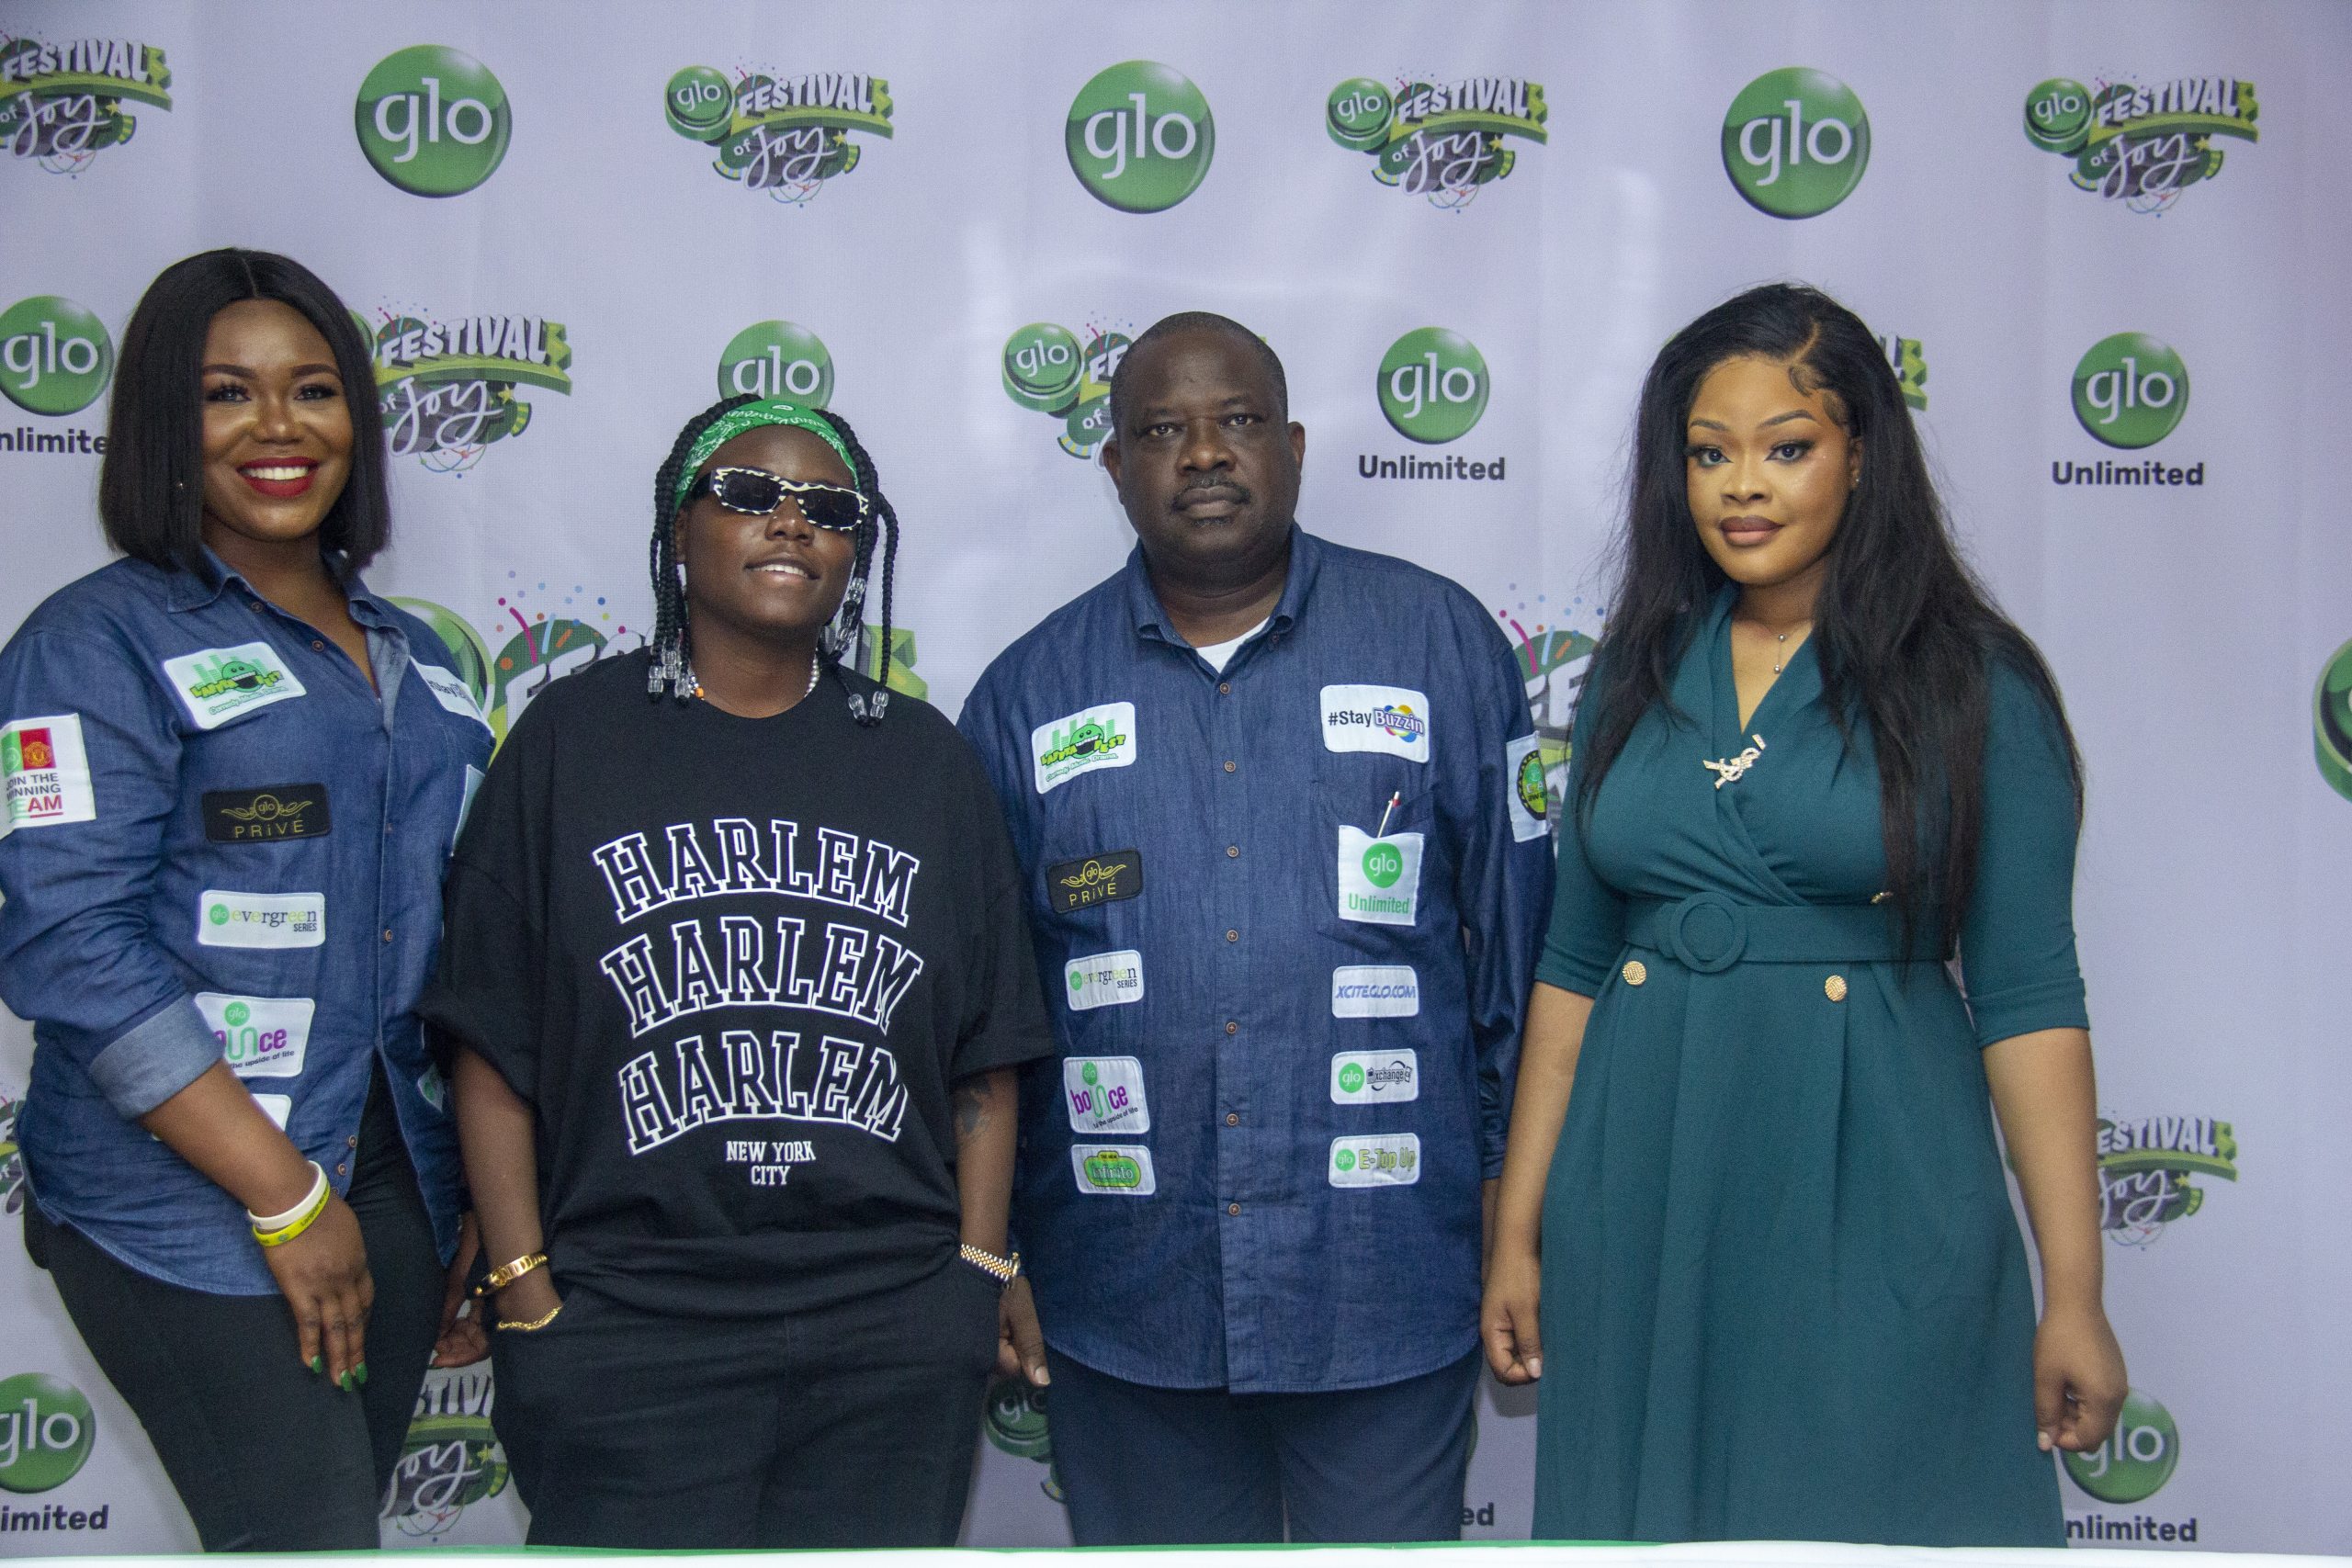 Glo to dole out 20 houses, 24 cars in Festival of Joy Promo